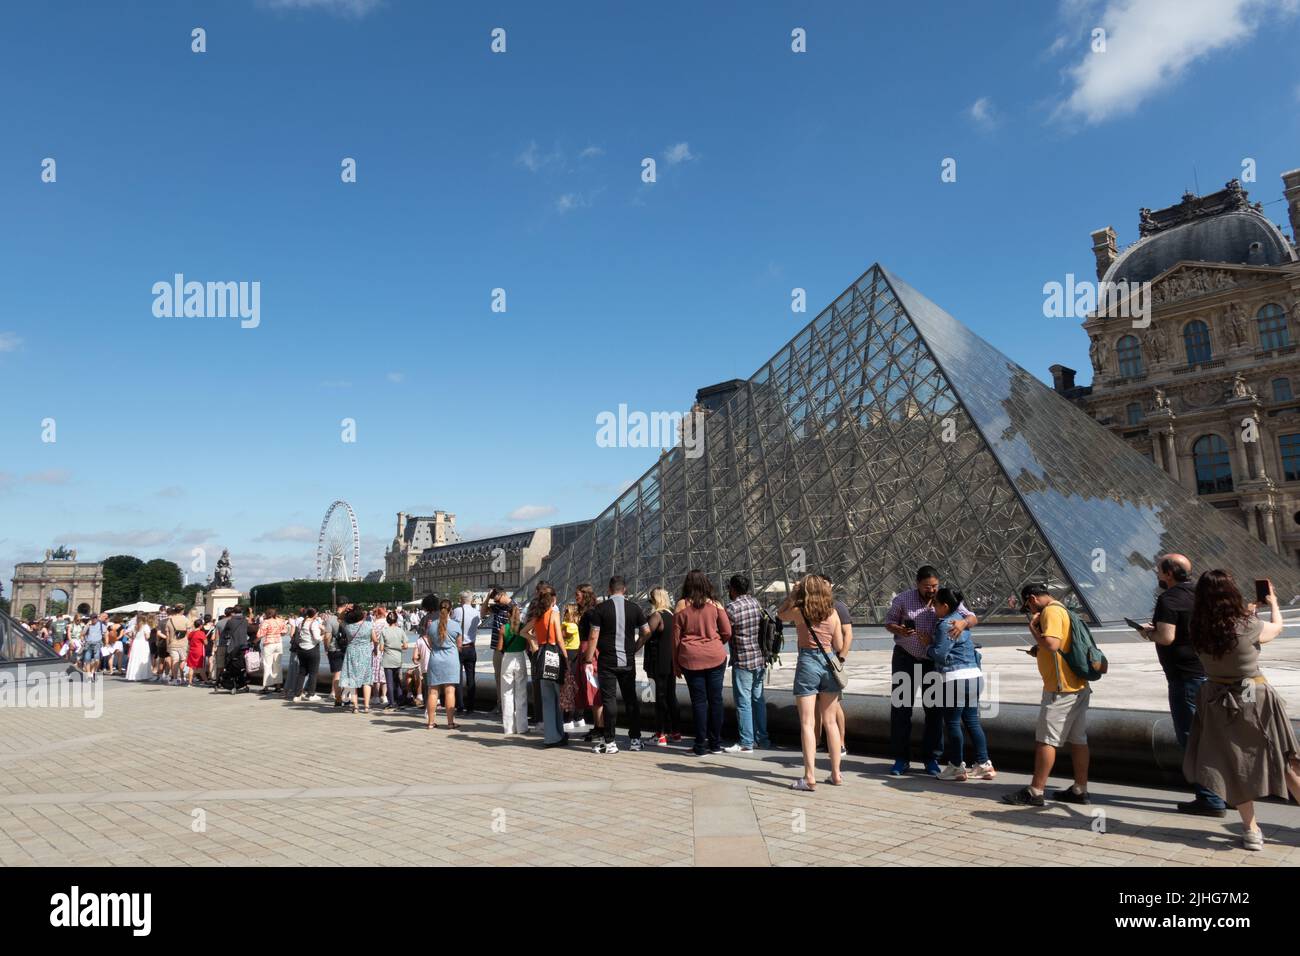 People standing in line waiting to enter the Louvre Museum in Paris Stock Photo